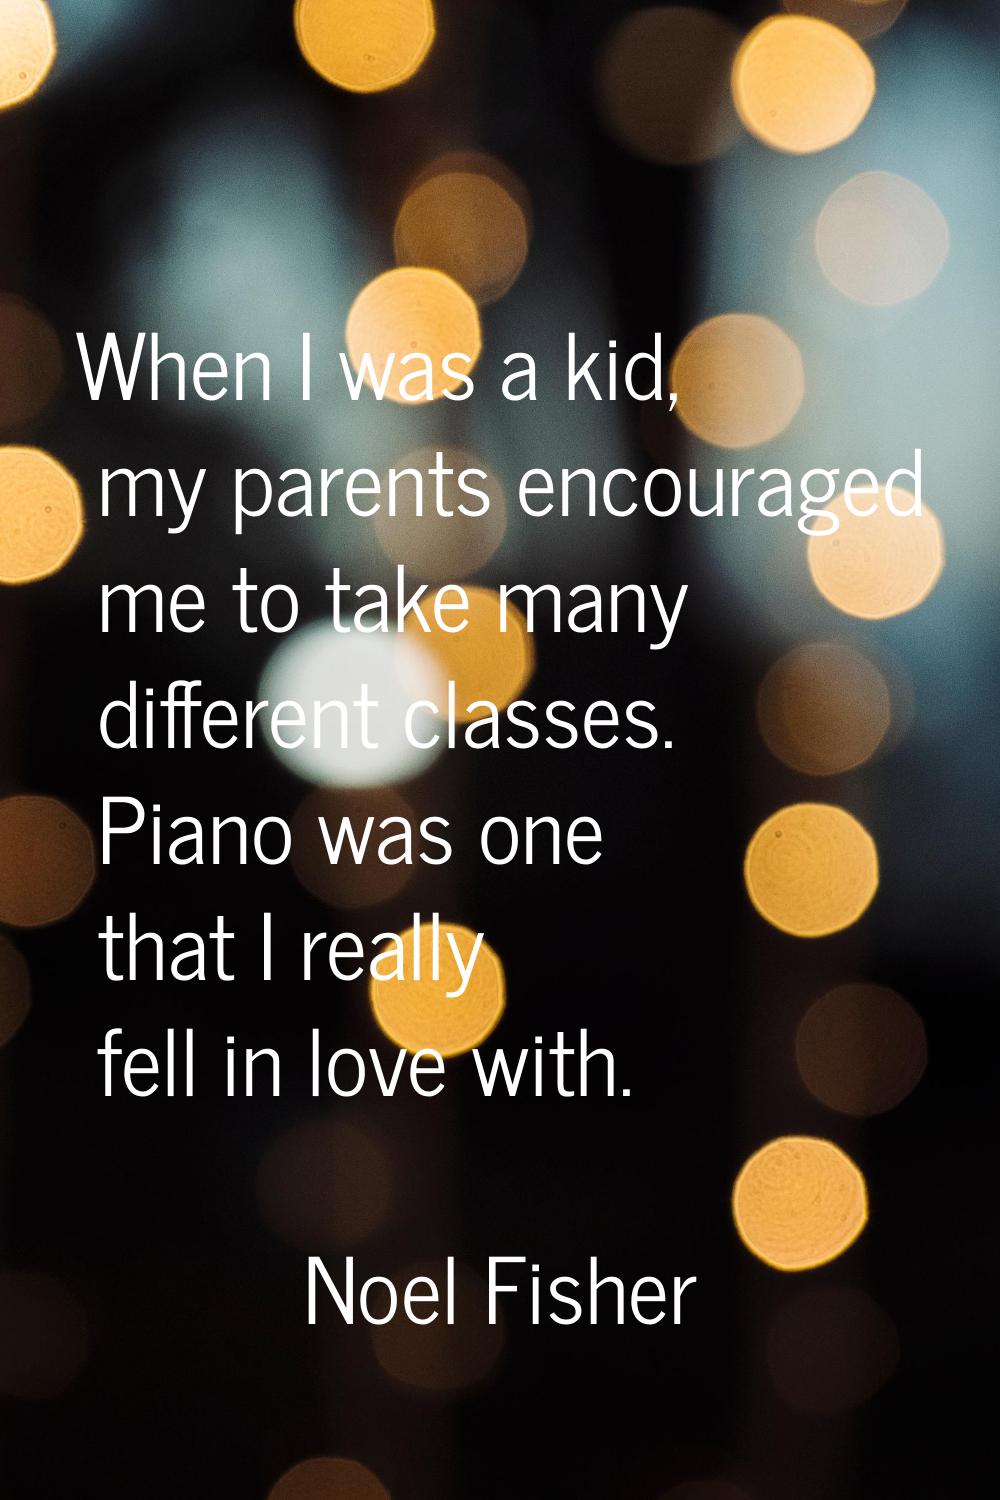 When I was a kid, my parents encouraged me to take many different classes. Piano was one that I rea